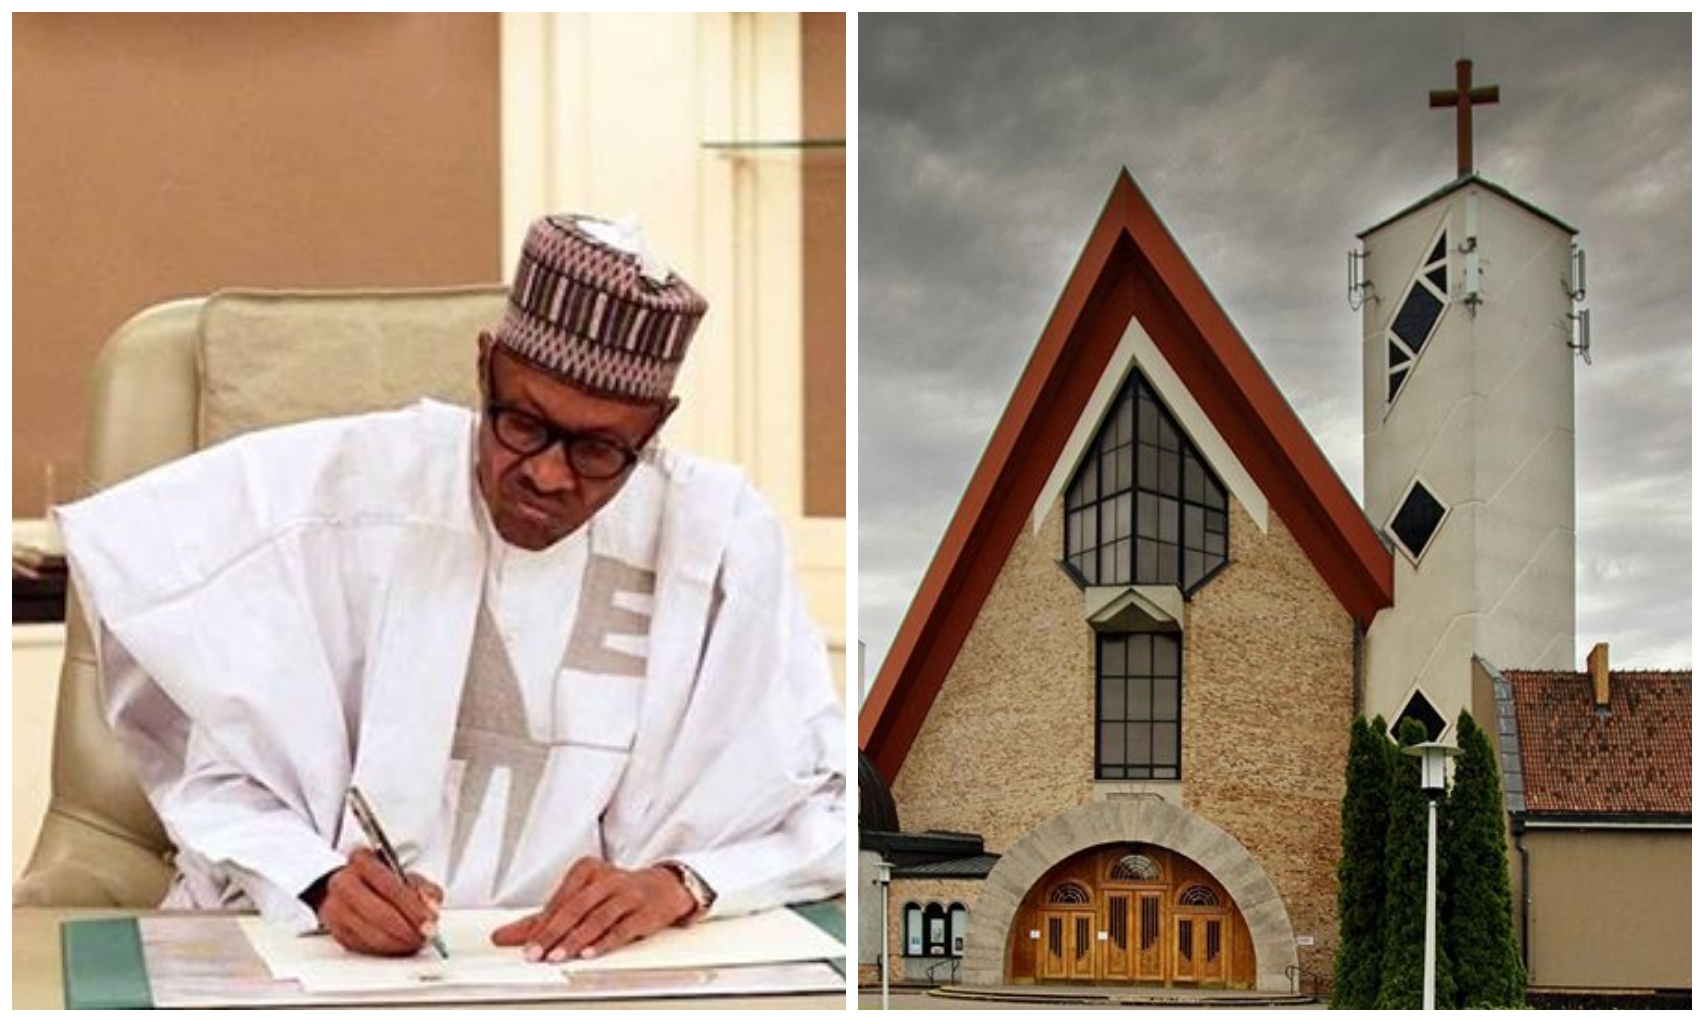 Churches, mosques to reopen as FG lifts ban on religious gatherings